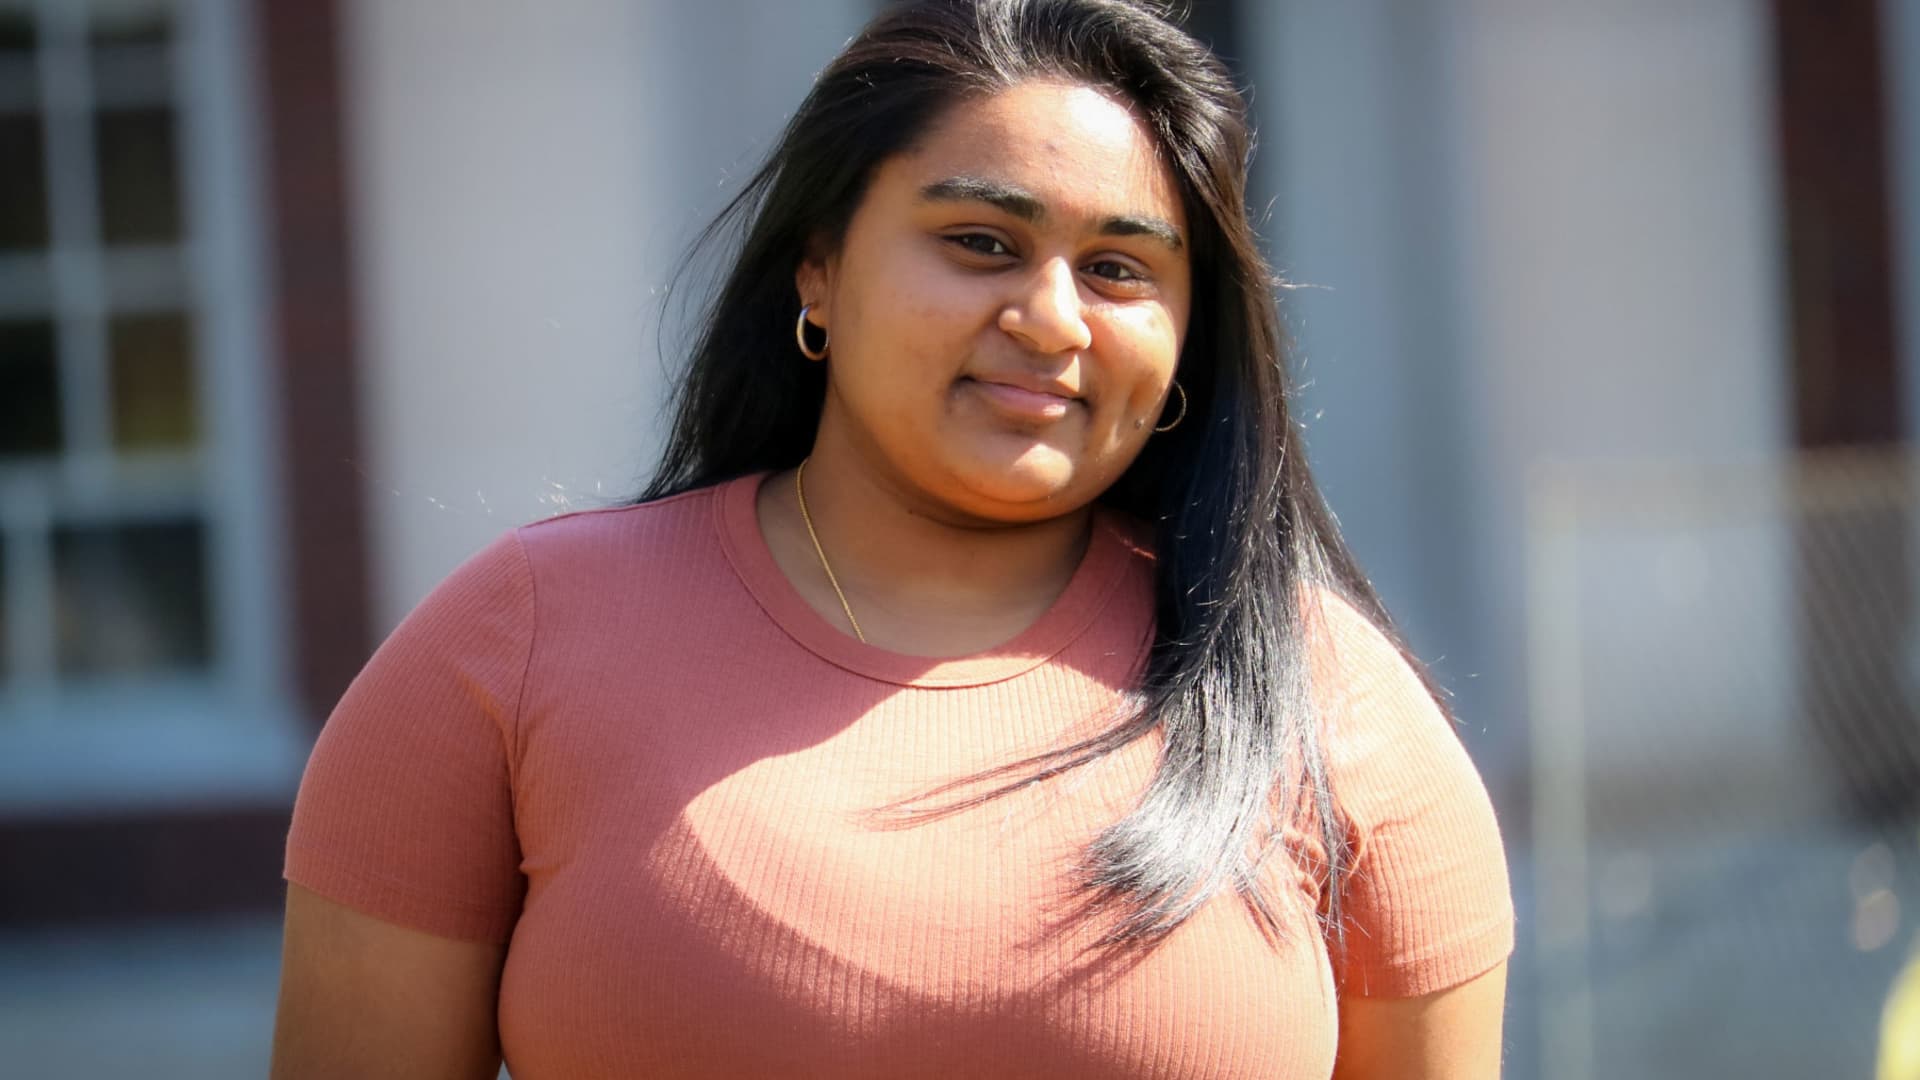 Jasmine Mathai, a junior double major in marketing and entrepreneurship with a minor in psychology at Fairleigh Dickinson University in Madison, NJ. Founding member of the student-run snack bar Mansion Munchies at the University.